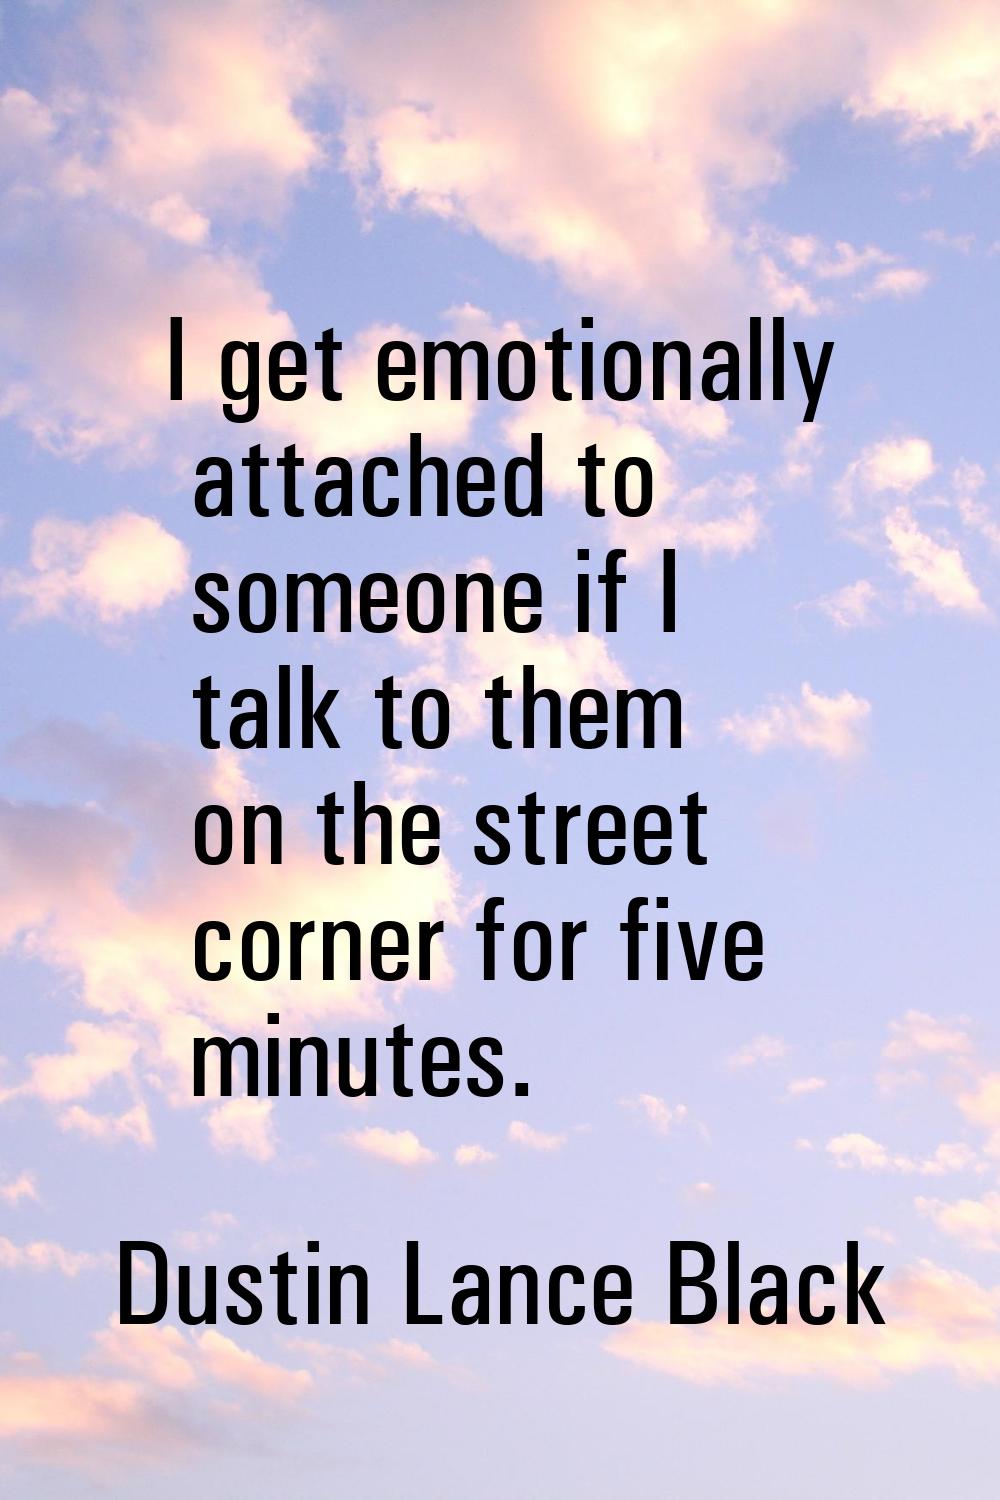 I get emotionally attached to someone if I talk to them on the street corner for five minutes.